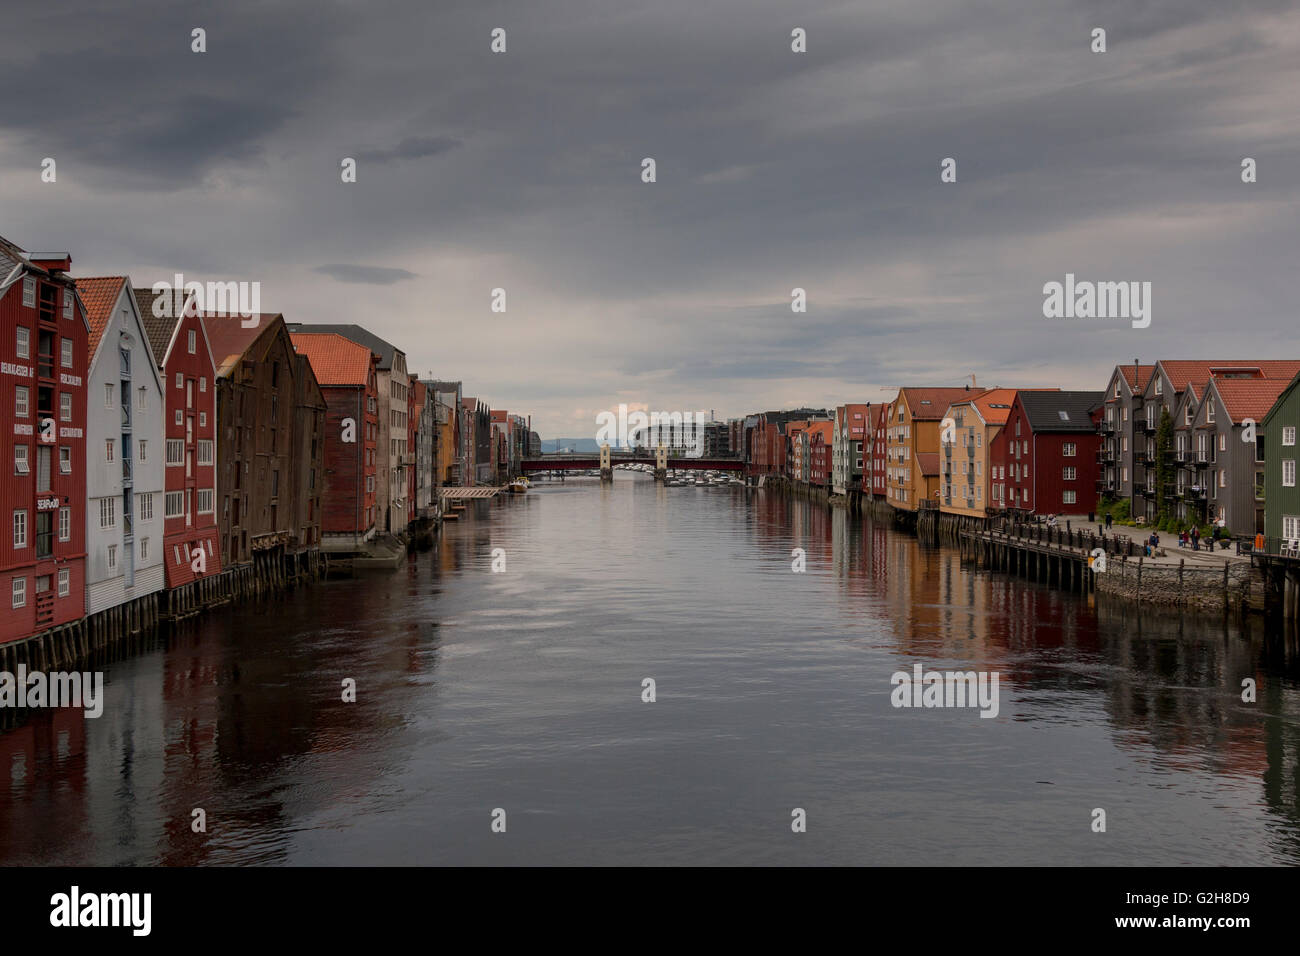 View over Nidelva river in Trondheim, Norway with historic buildings on both sides on a cloudy day Stock Photo